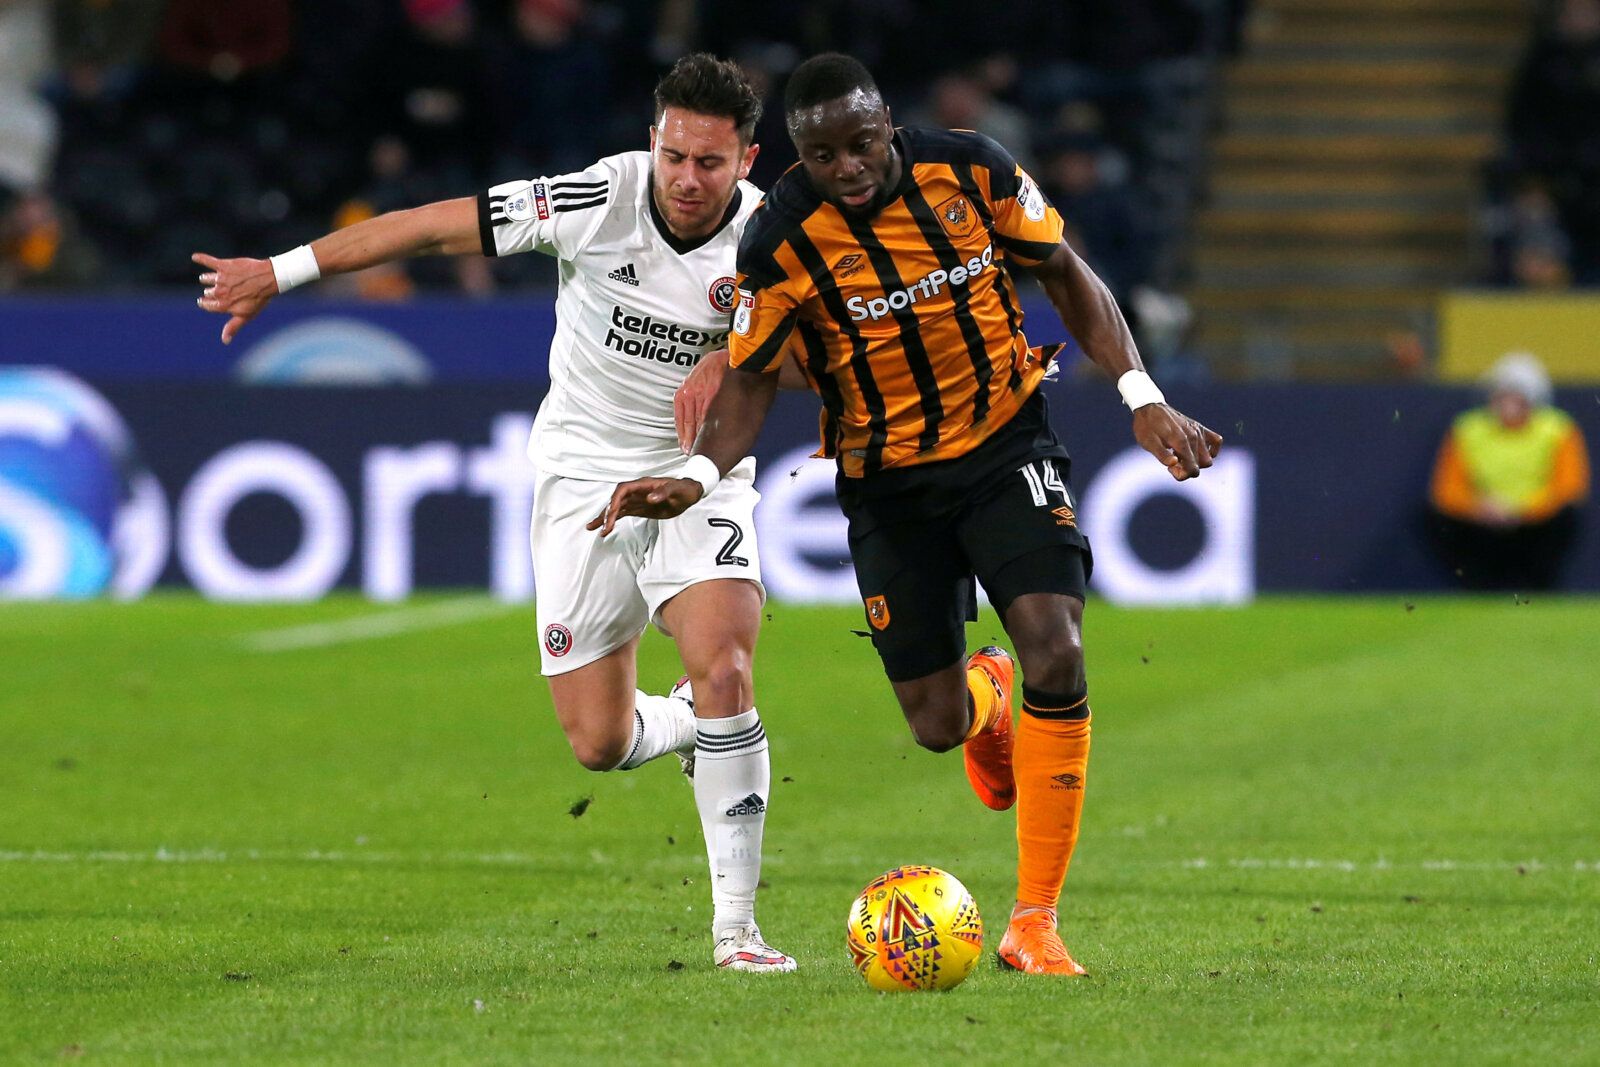 Soccer Football - Championship - Hull City vs Sheffield United - KCOM Stadium, Hull, Britain - February 23, 2018   Sheffield United's George Baldock in action with Hull City's Adama Diomande   Action Images/Craig Brough    EDITORIAL USE ONLY. No use with unauthorized audio, video, data, fixture lists, club/league logos or 